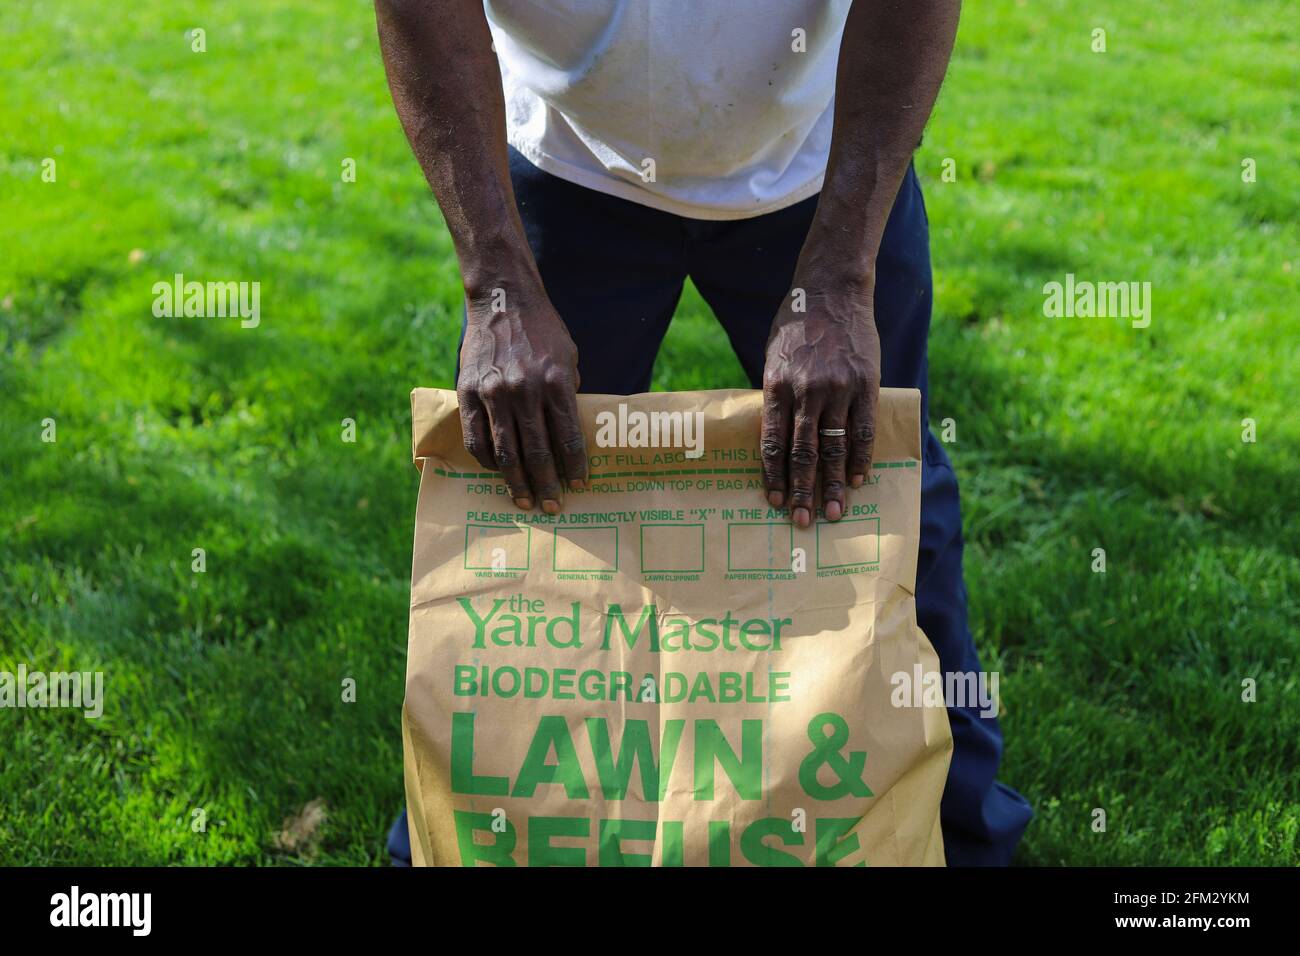 Louisville, Ky USA- May 3, 2021: A black man holding a Yard Master biodegradable Lawn and Refuse bag Stock Photo